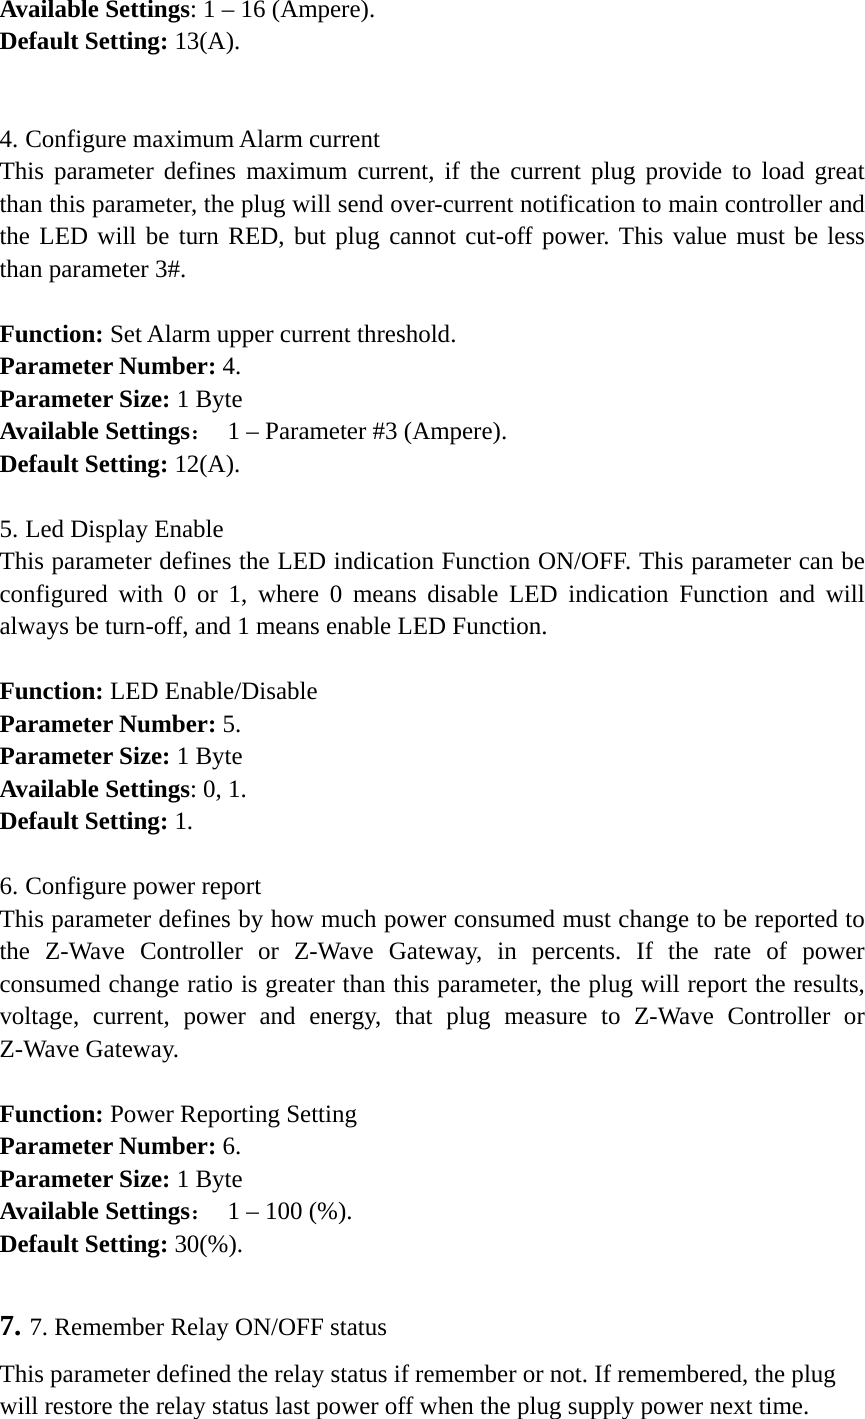    Available Settings: 1 – 16 (Ampere). Default Setting: 13(A).  4. Configure maximum Alarm current This parameter defines maximum current, if the current plug provide to load great than this parameter, the plug will send over-current notification to main controller and the LED will be turn RED, but plug cannot cut-off power. This value must be less than parameter 3#.  Function: Set Alarm upper current threshold. Parameter Number: 4. Parameter Size: 1 Byte Available Settings：  1 – Parameter #3 (Ampere). Default Setting: 12(A).  5. Led Display Enable This parameter defines the LED indication Function ON/OFF. This parameter can be configured with 0 or 1, where 0 means disable LED indication Function and will always be turn-off, and 1 means enable LED Function.  Function: LED Enable/Disable Parameter Number: 5. Parameter Size: 1 Byte Available Settings: 0, 1. Default Setting: 1.  6. Configure power report This parameter defines by how much power consumed must change to be reported to the Z-Wave Controller or Z-Wave Gateway, in percents. If the rate of power consumed change ratio is greater than this parameter, the plug will report the results, voltage, current, power and energy, that plug measure to Z-Wave Controller or Z-Wave Gateway.  Function: Power Reporting Setting Parameter Number: 6. Parameter Size: 1 Byte Available Settings：  1 – 100 (%). Default Setting: 30(%).  7. 7. Remember Relay ON/OFF status This parameter defined the relay status if remember or not. If remembered, the plug will restore the relay status last power off when the plug supply power next time. 